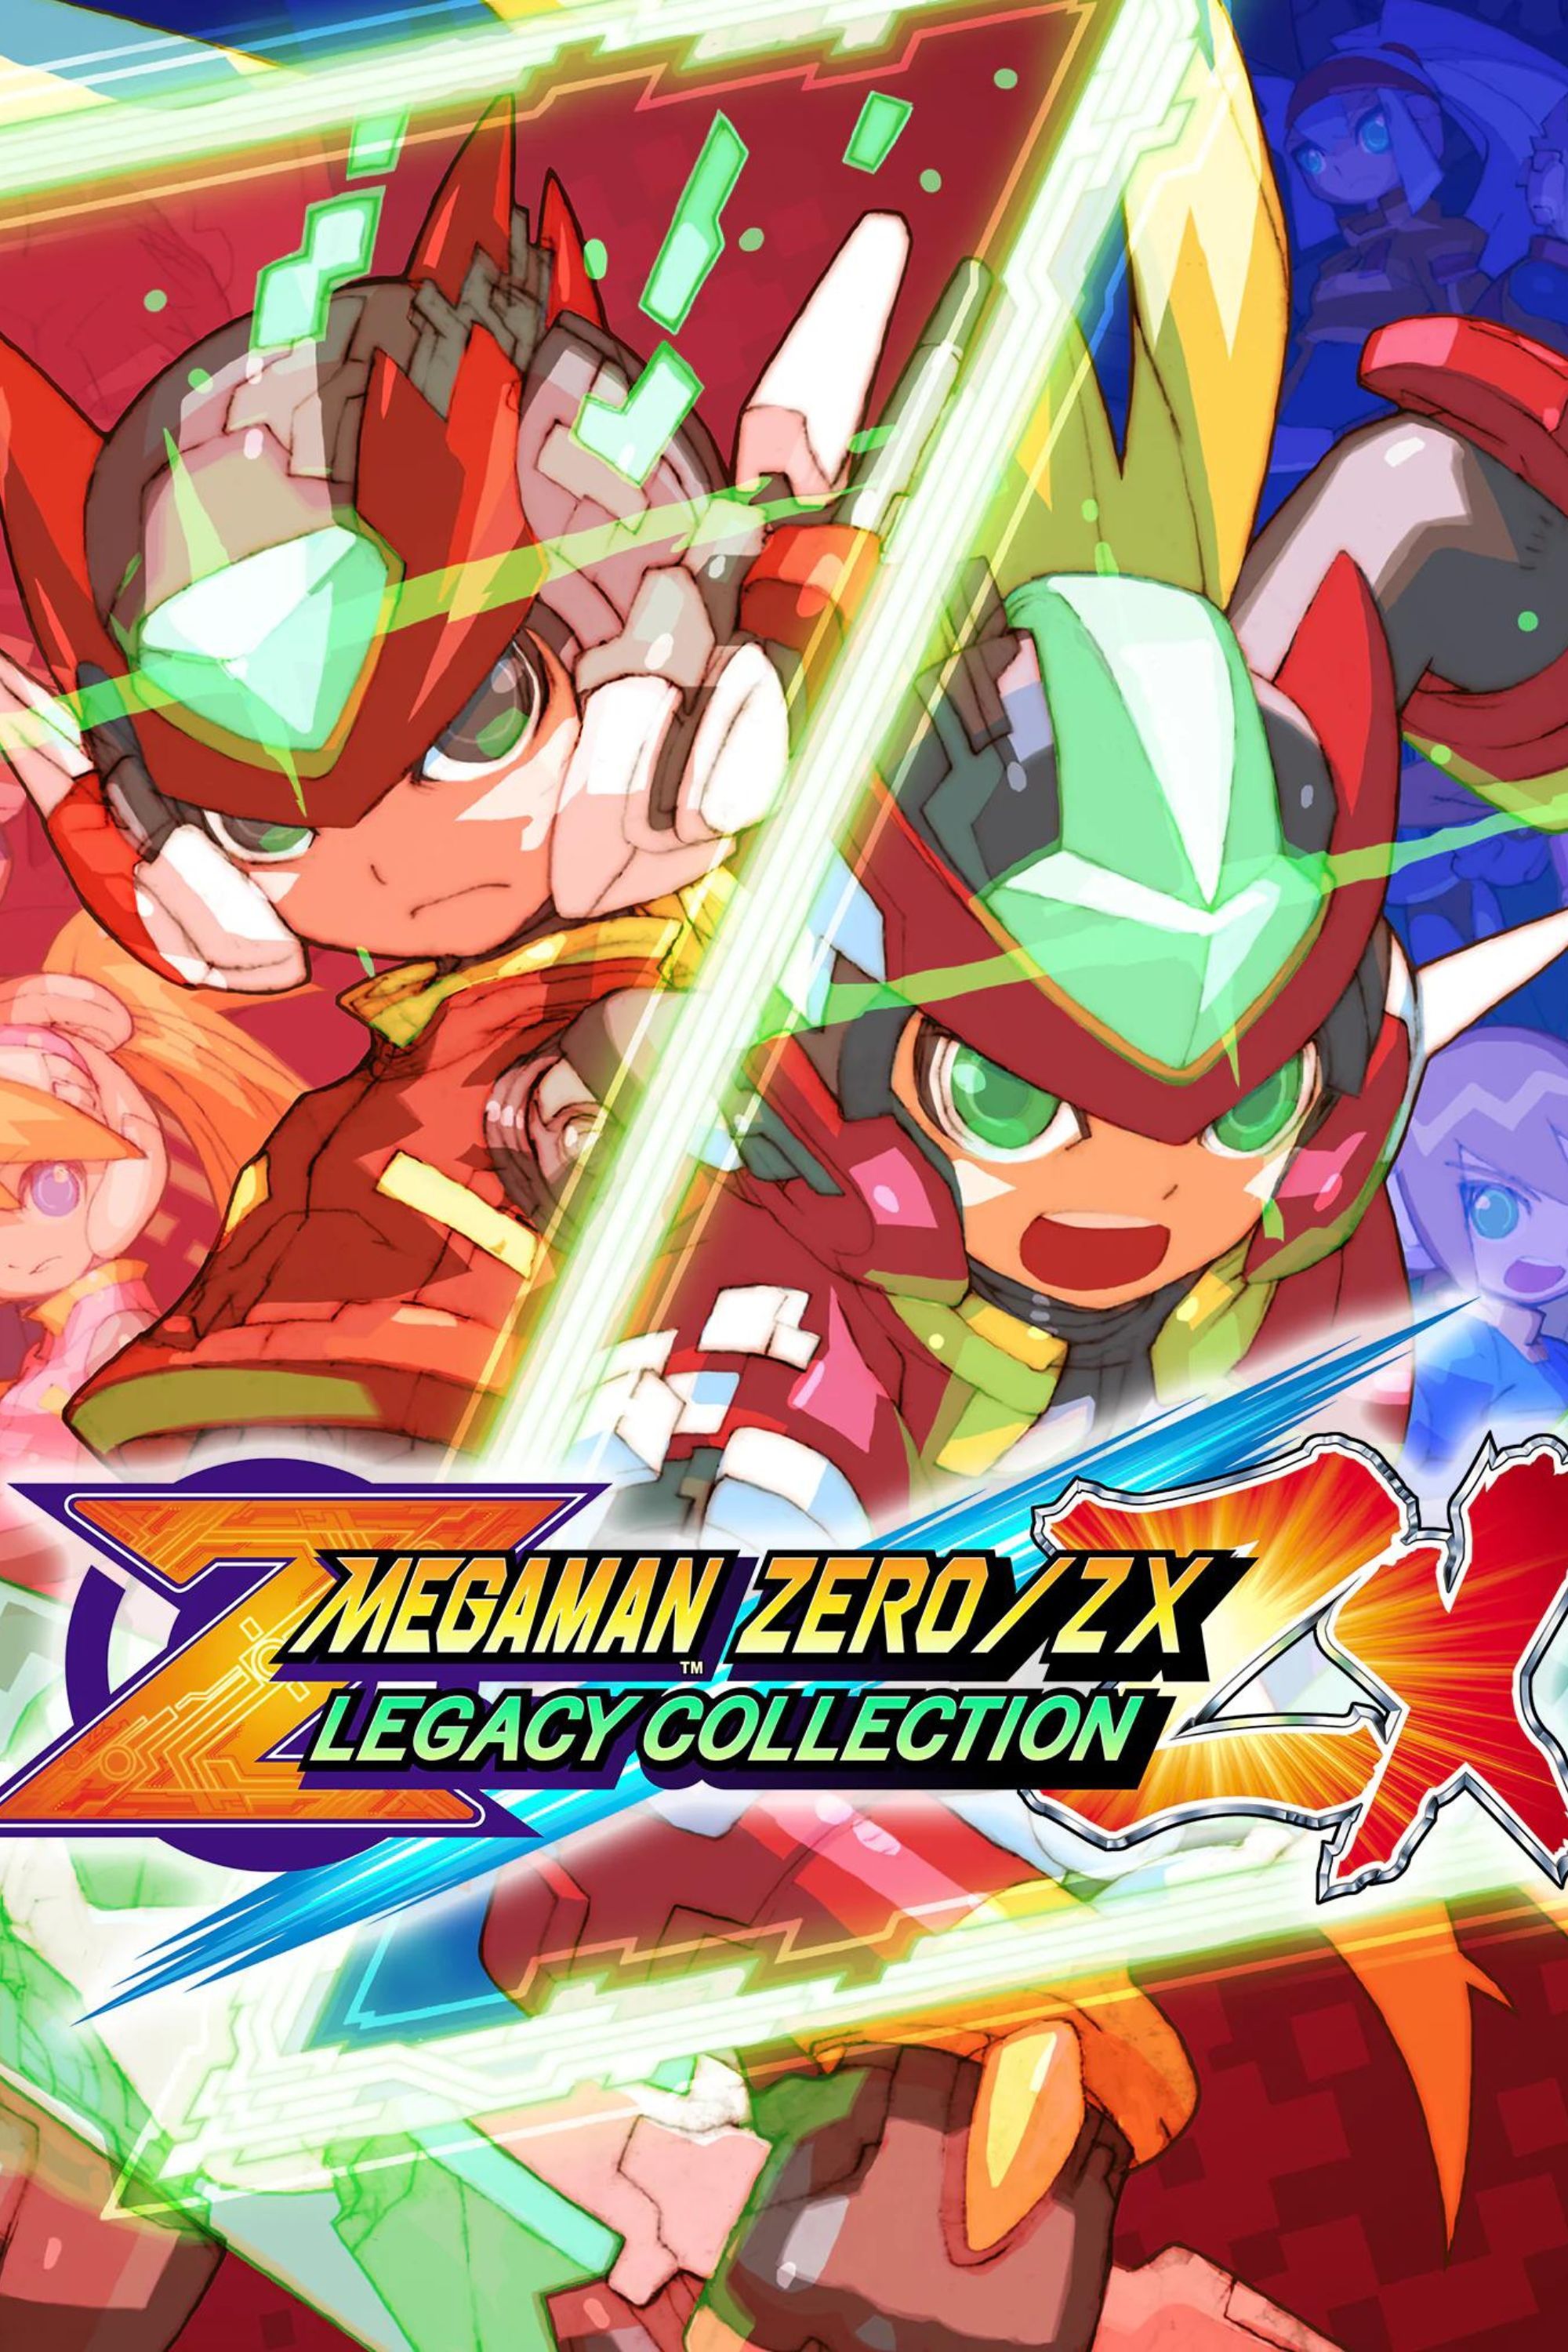 2000x3000 tag image for Mega Man Zero/ZX Legacy Collection showing both protagonists in red a green behind the game logo